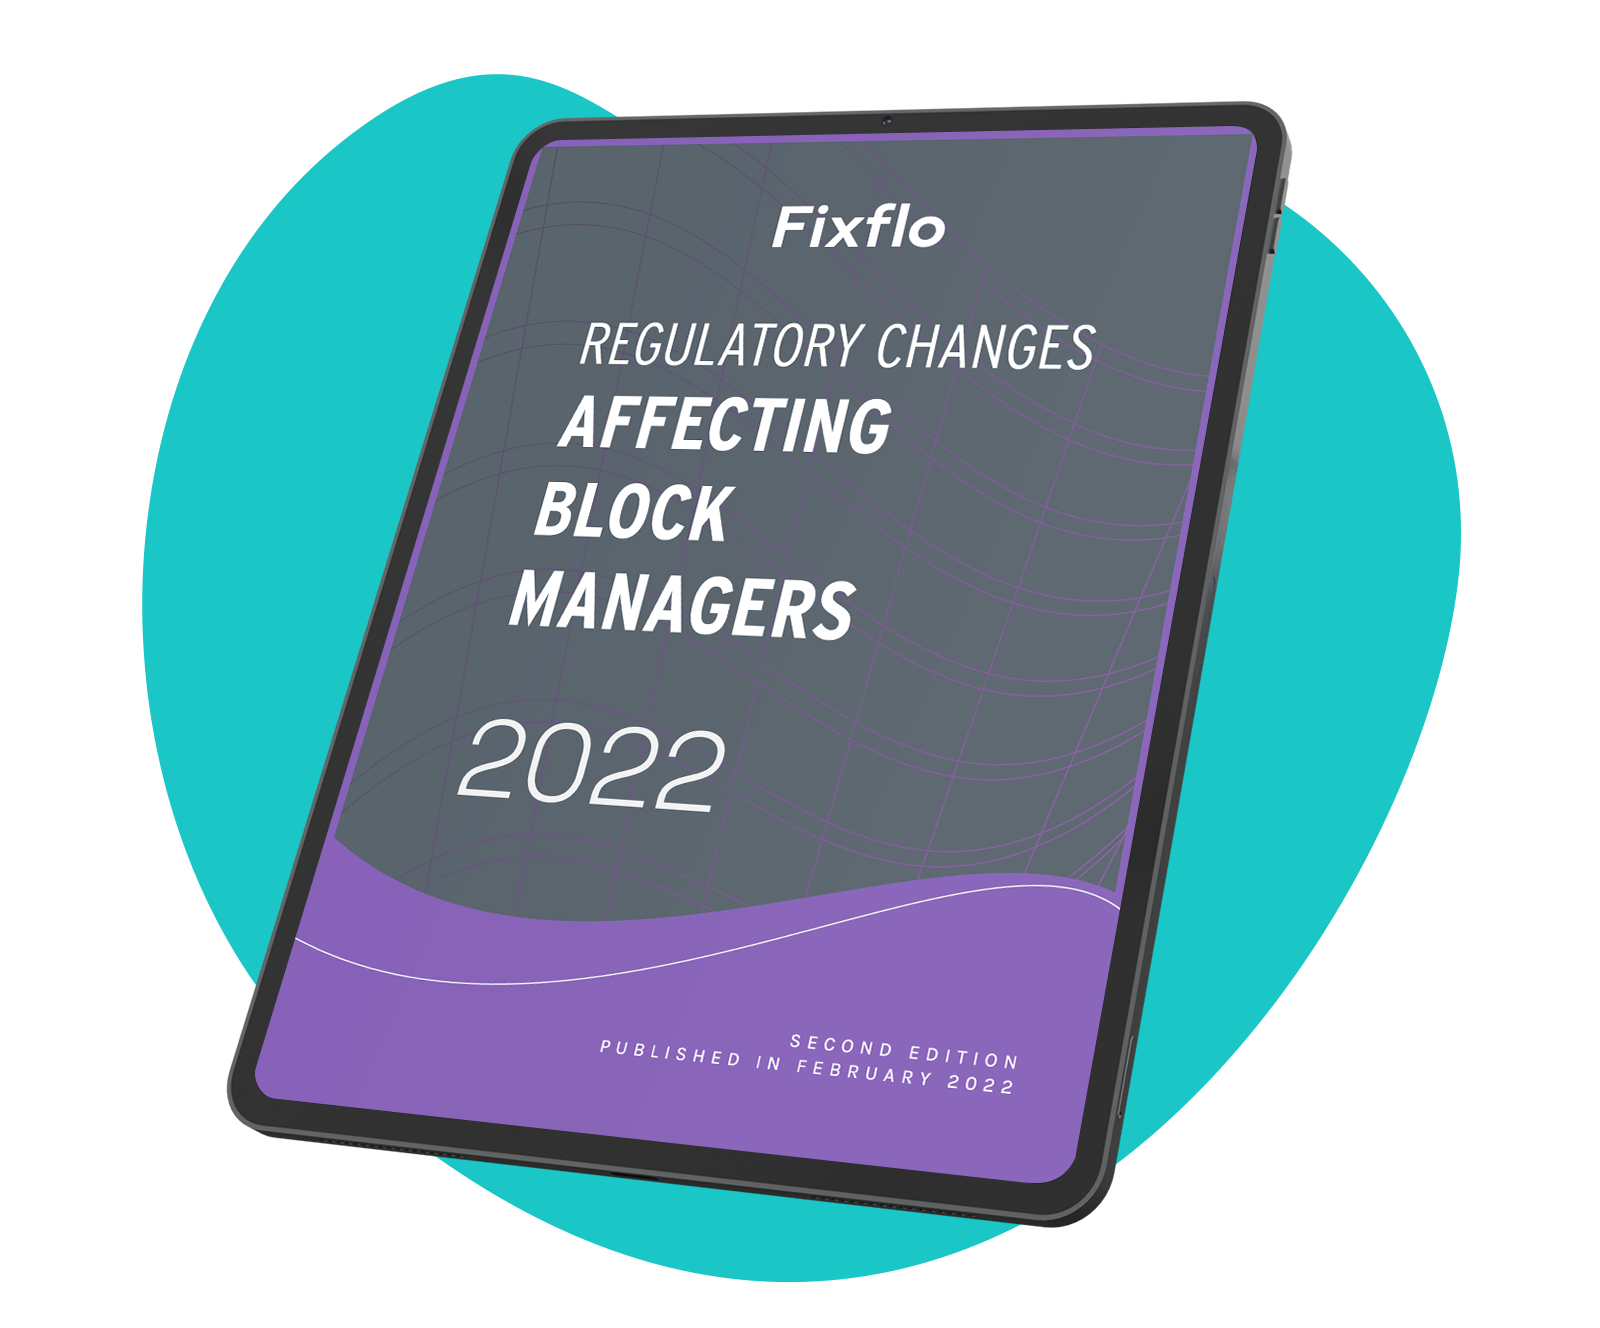 eBook: Regulatory Changes Affecting Block Managers in 2022 eBook